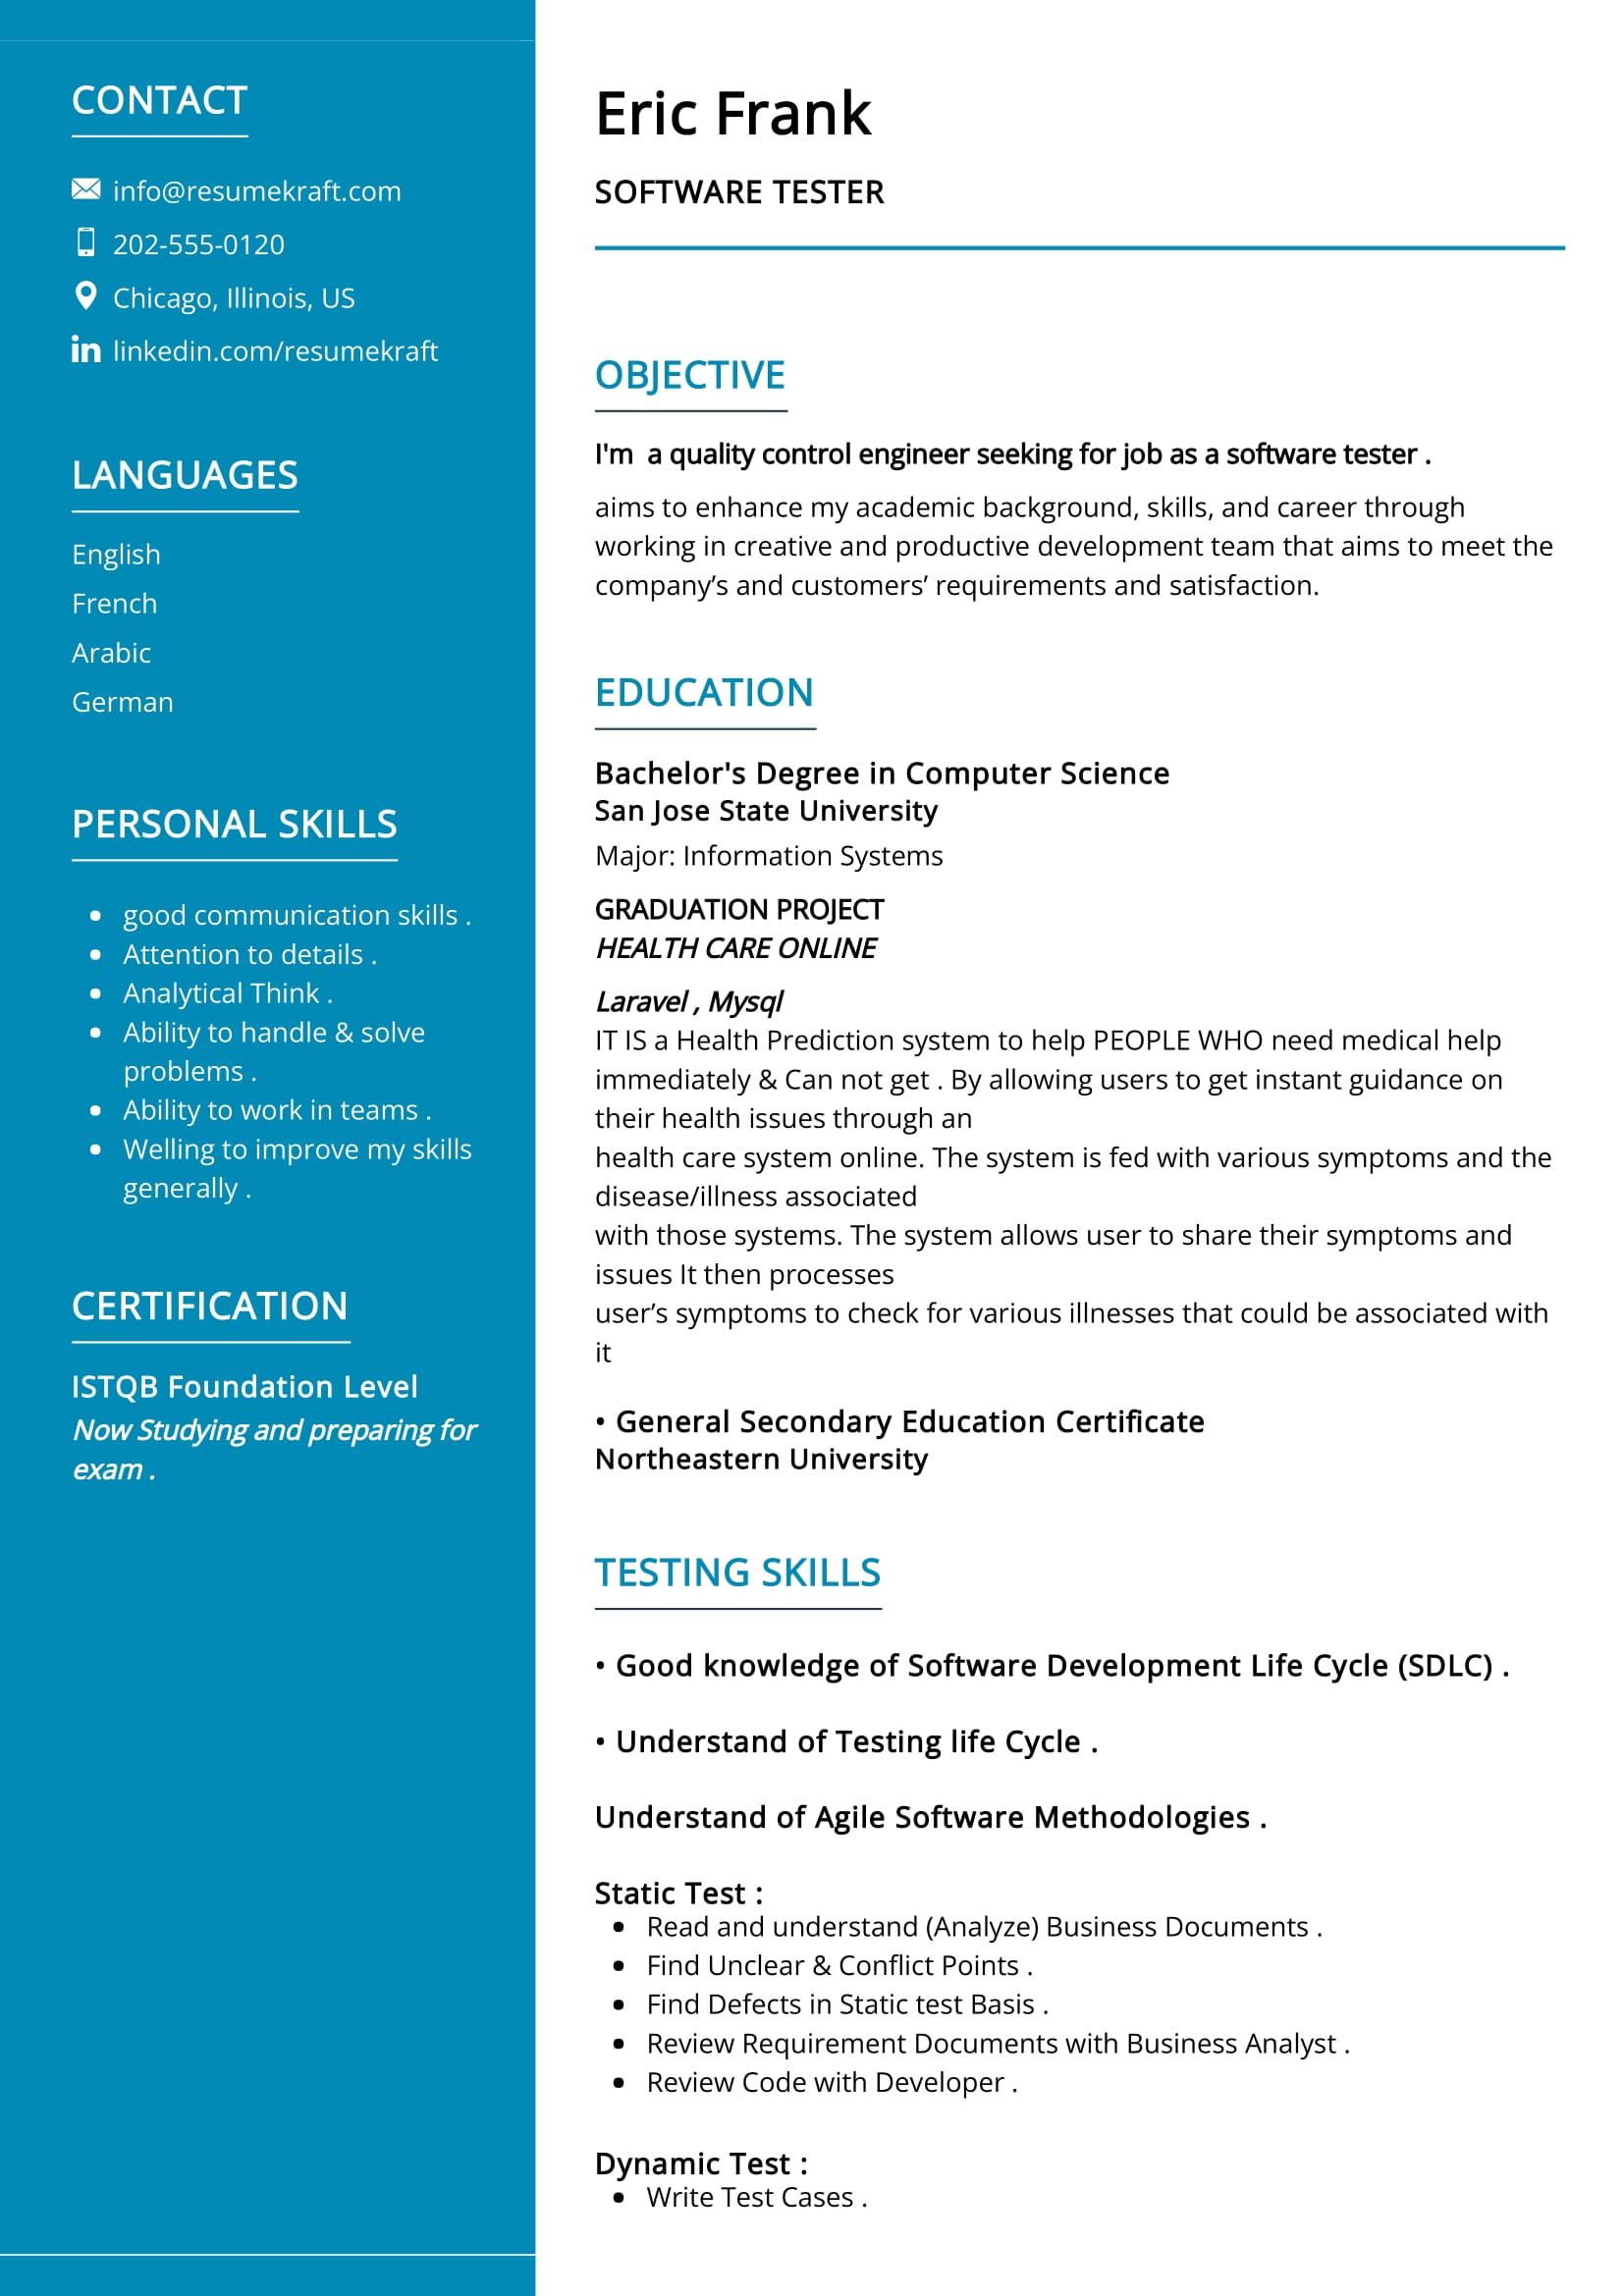 Software Tester Resume Example